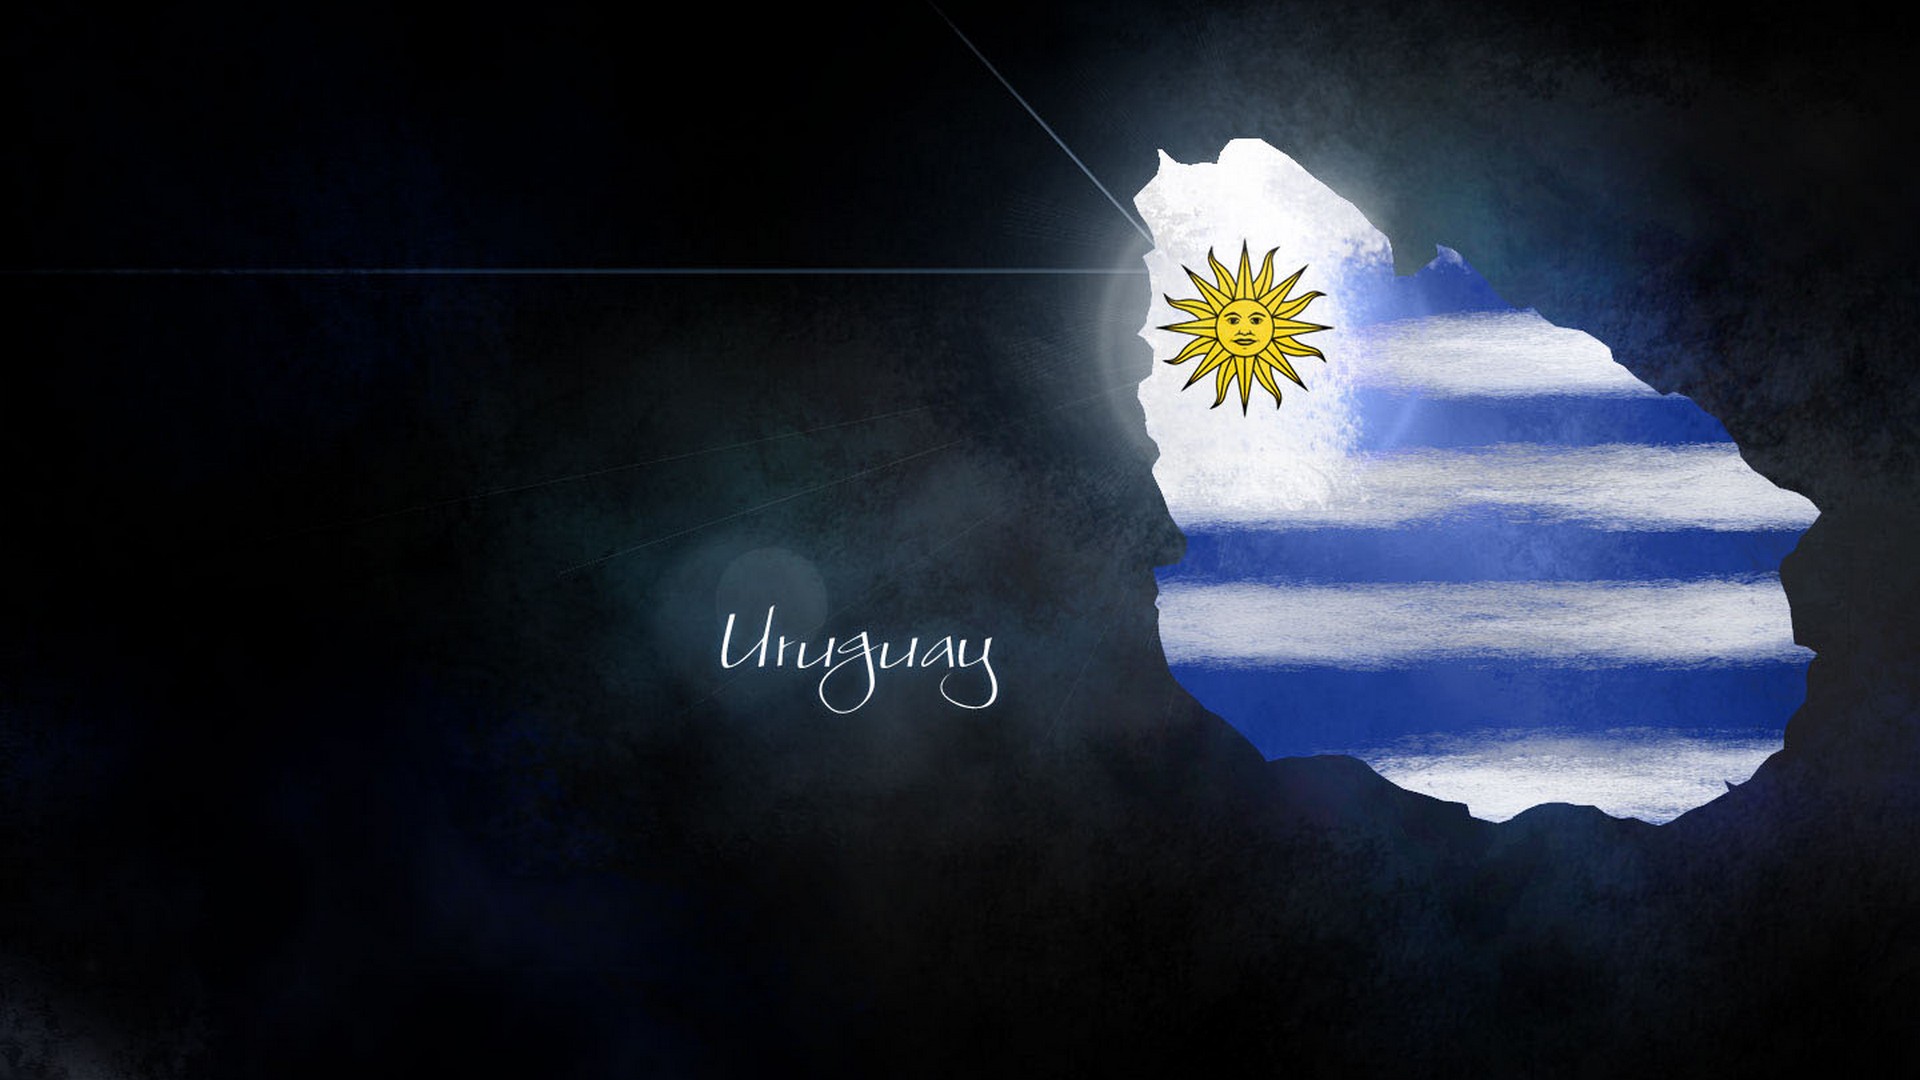 Desktop Wallpaper Uruguay National Team with image resolution 1920x1080 pixel. You can use this wallpaper as background for your desktop Computer Screensavers, Android or iPhone smartphones